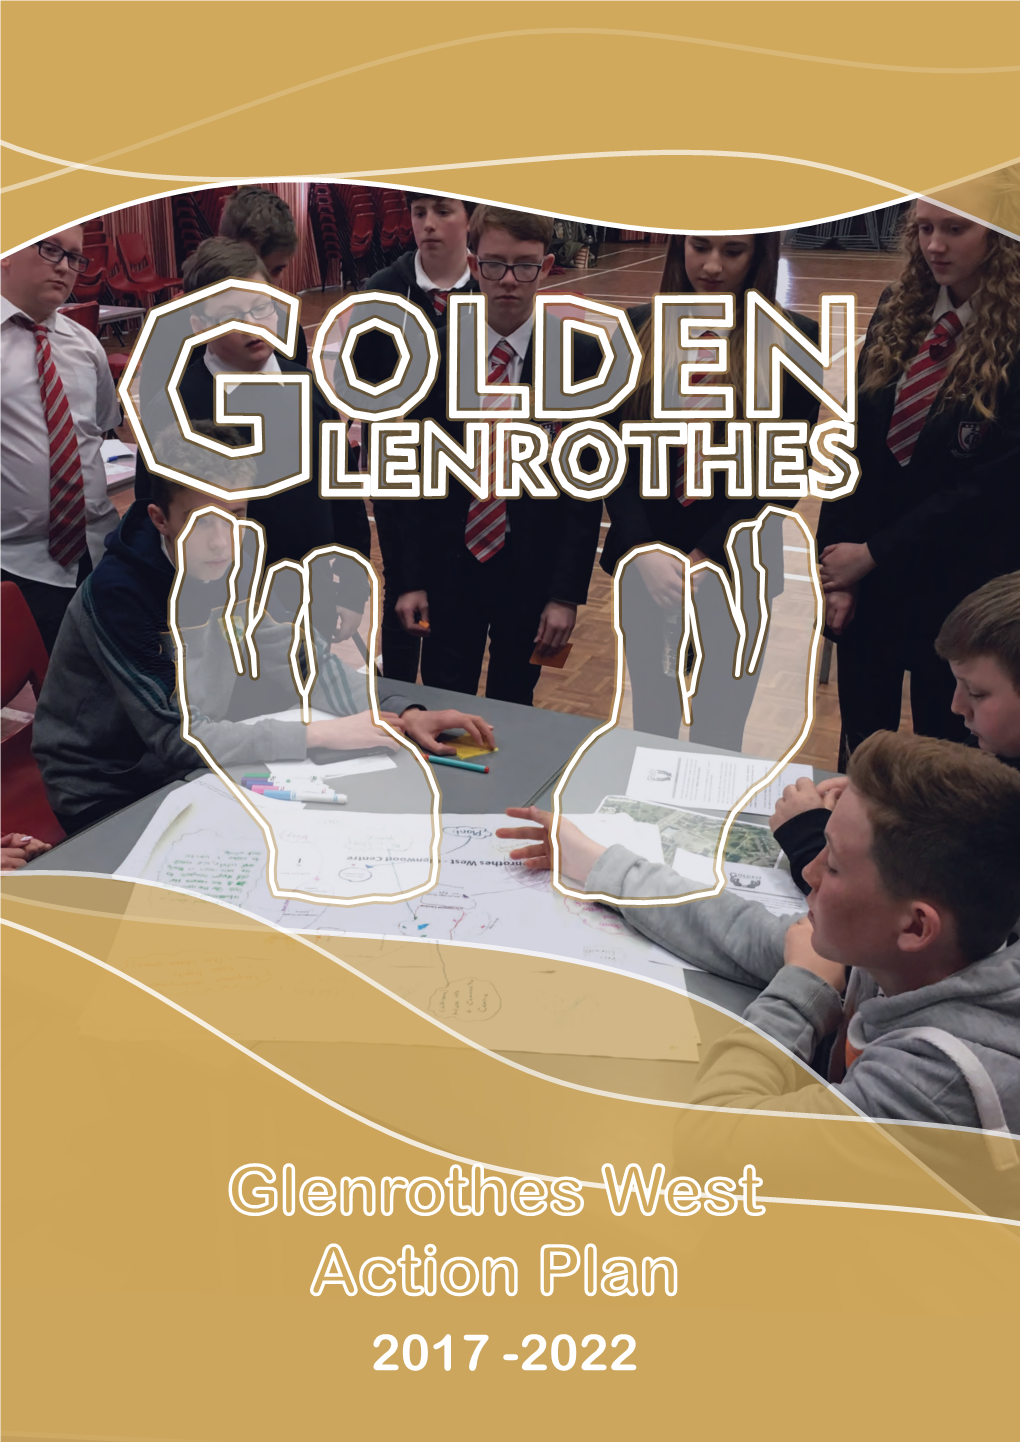 Glenrothes West Action Plan